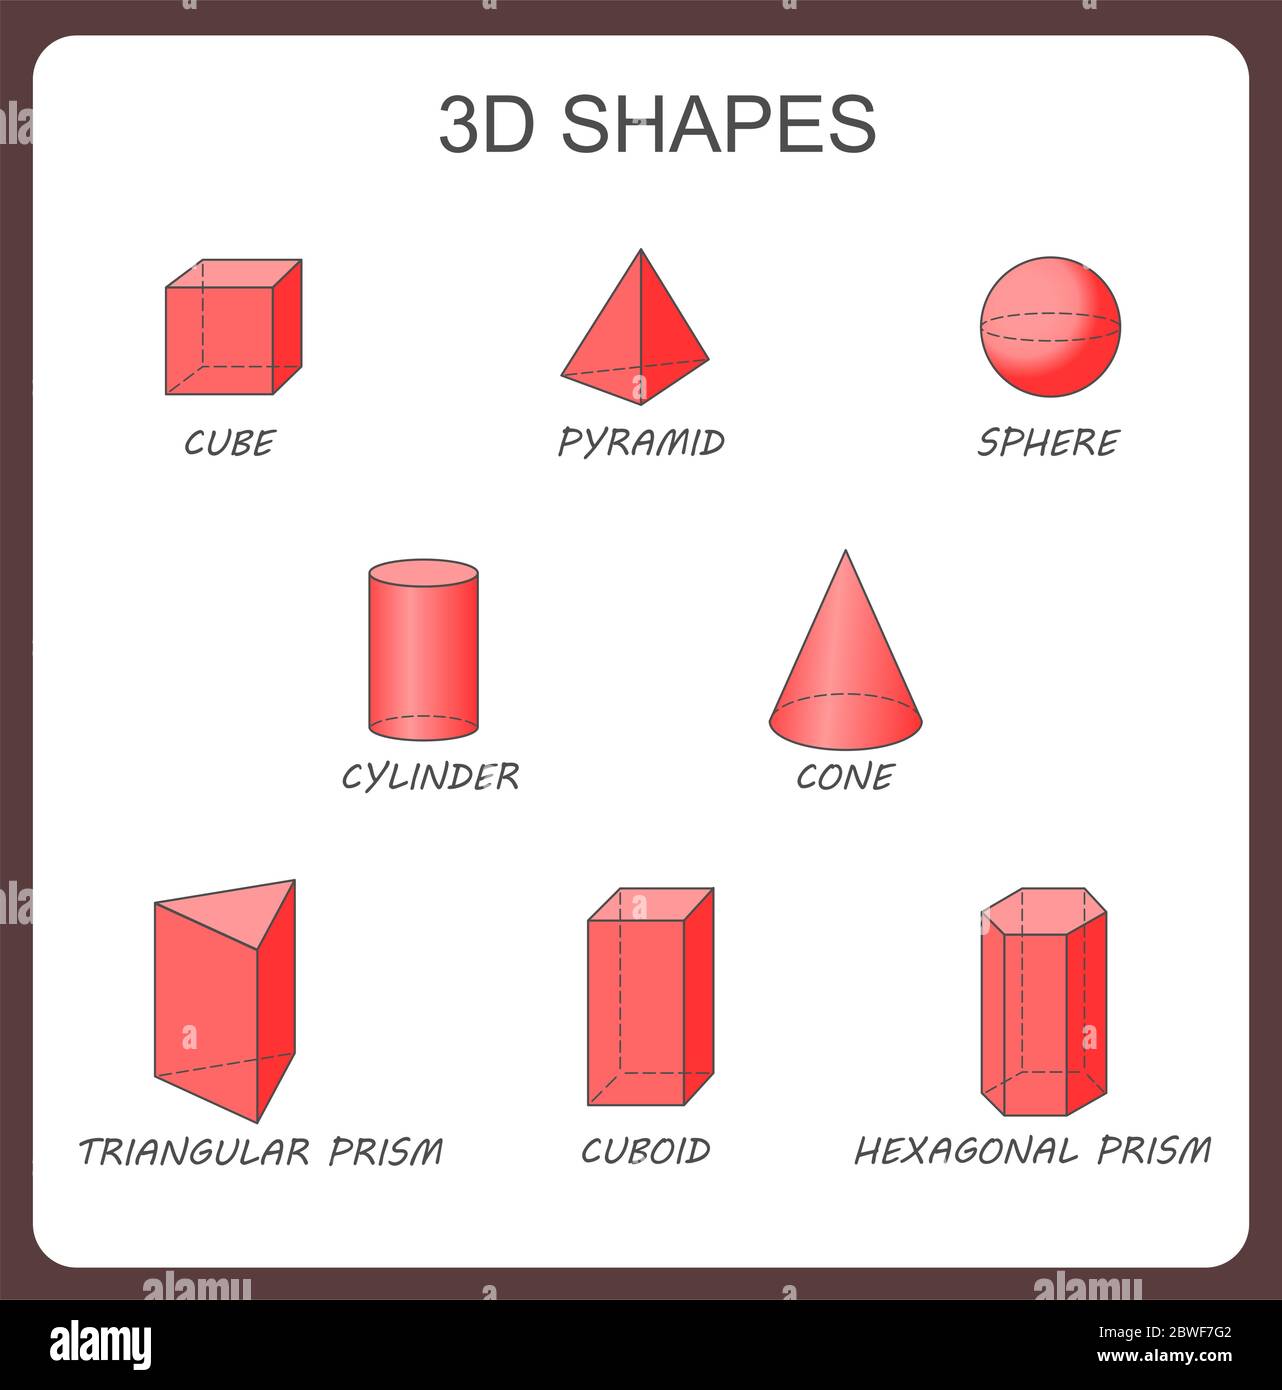 Solid 3d shapes: cylinder, cube, prism, sphere, pyramid, hexagonal ...